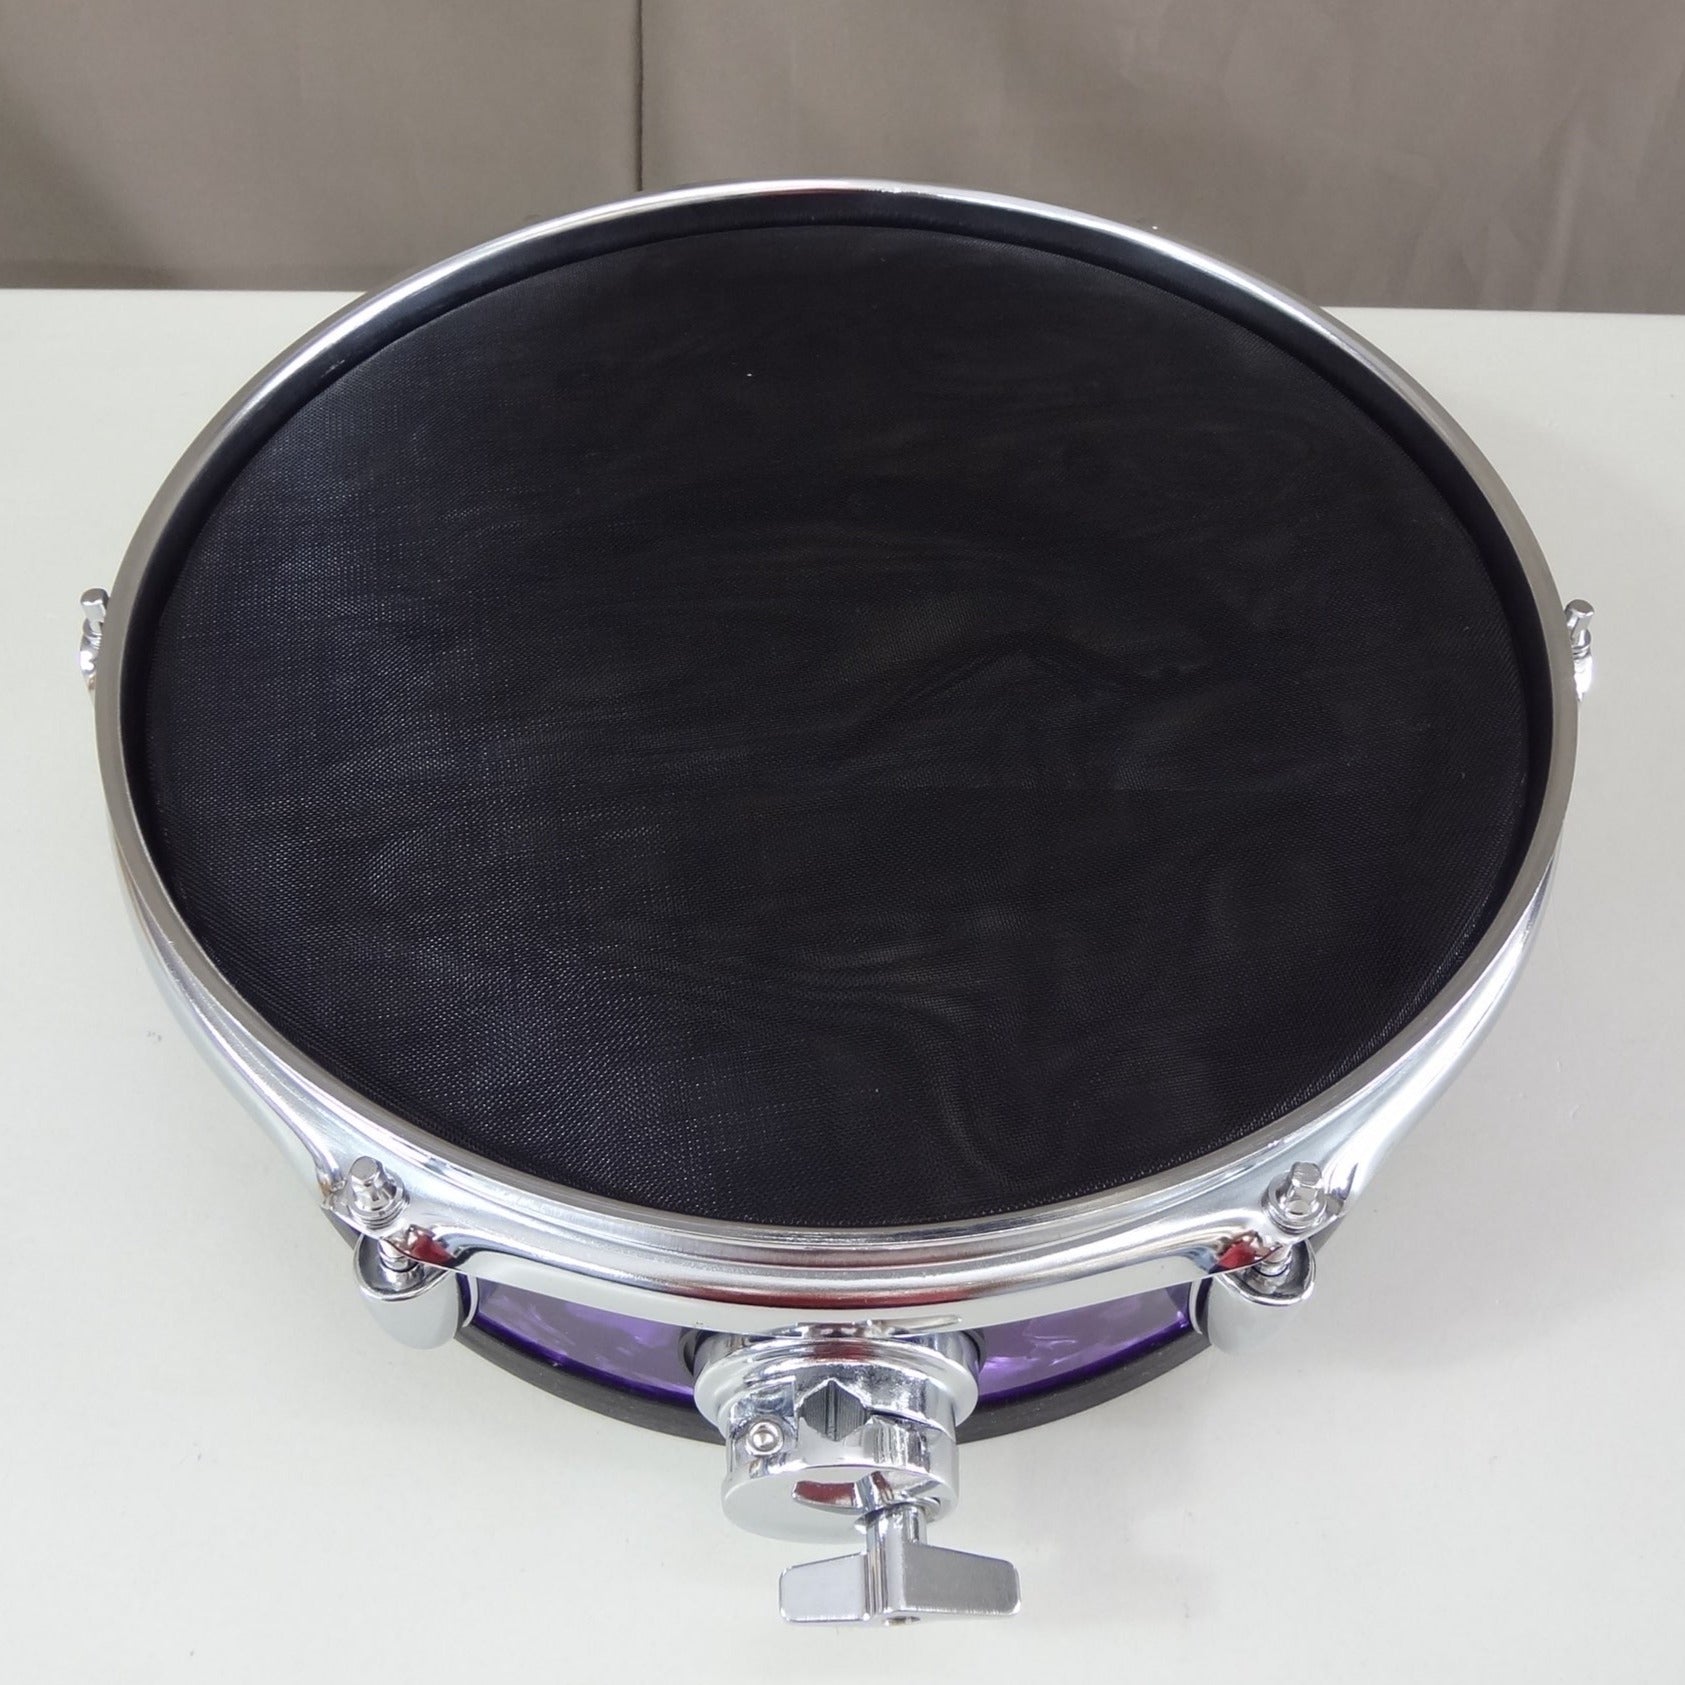 Top Down view of 12 inch custom electronic snare drum purple pearl wrap